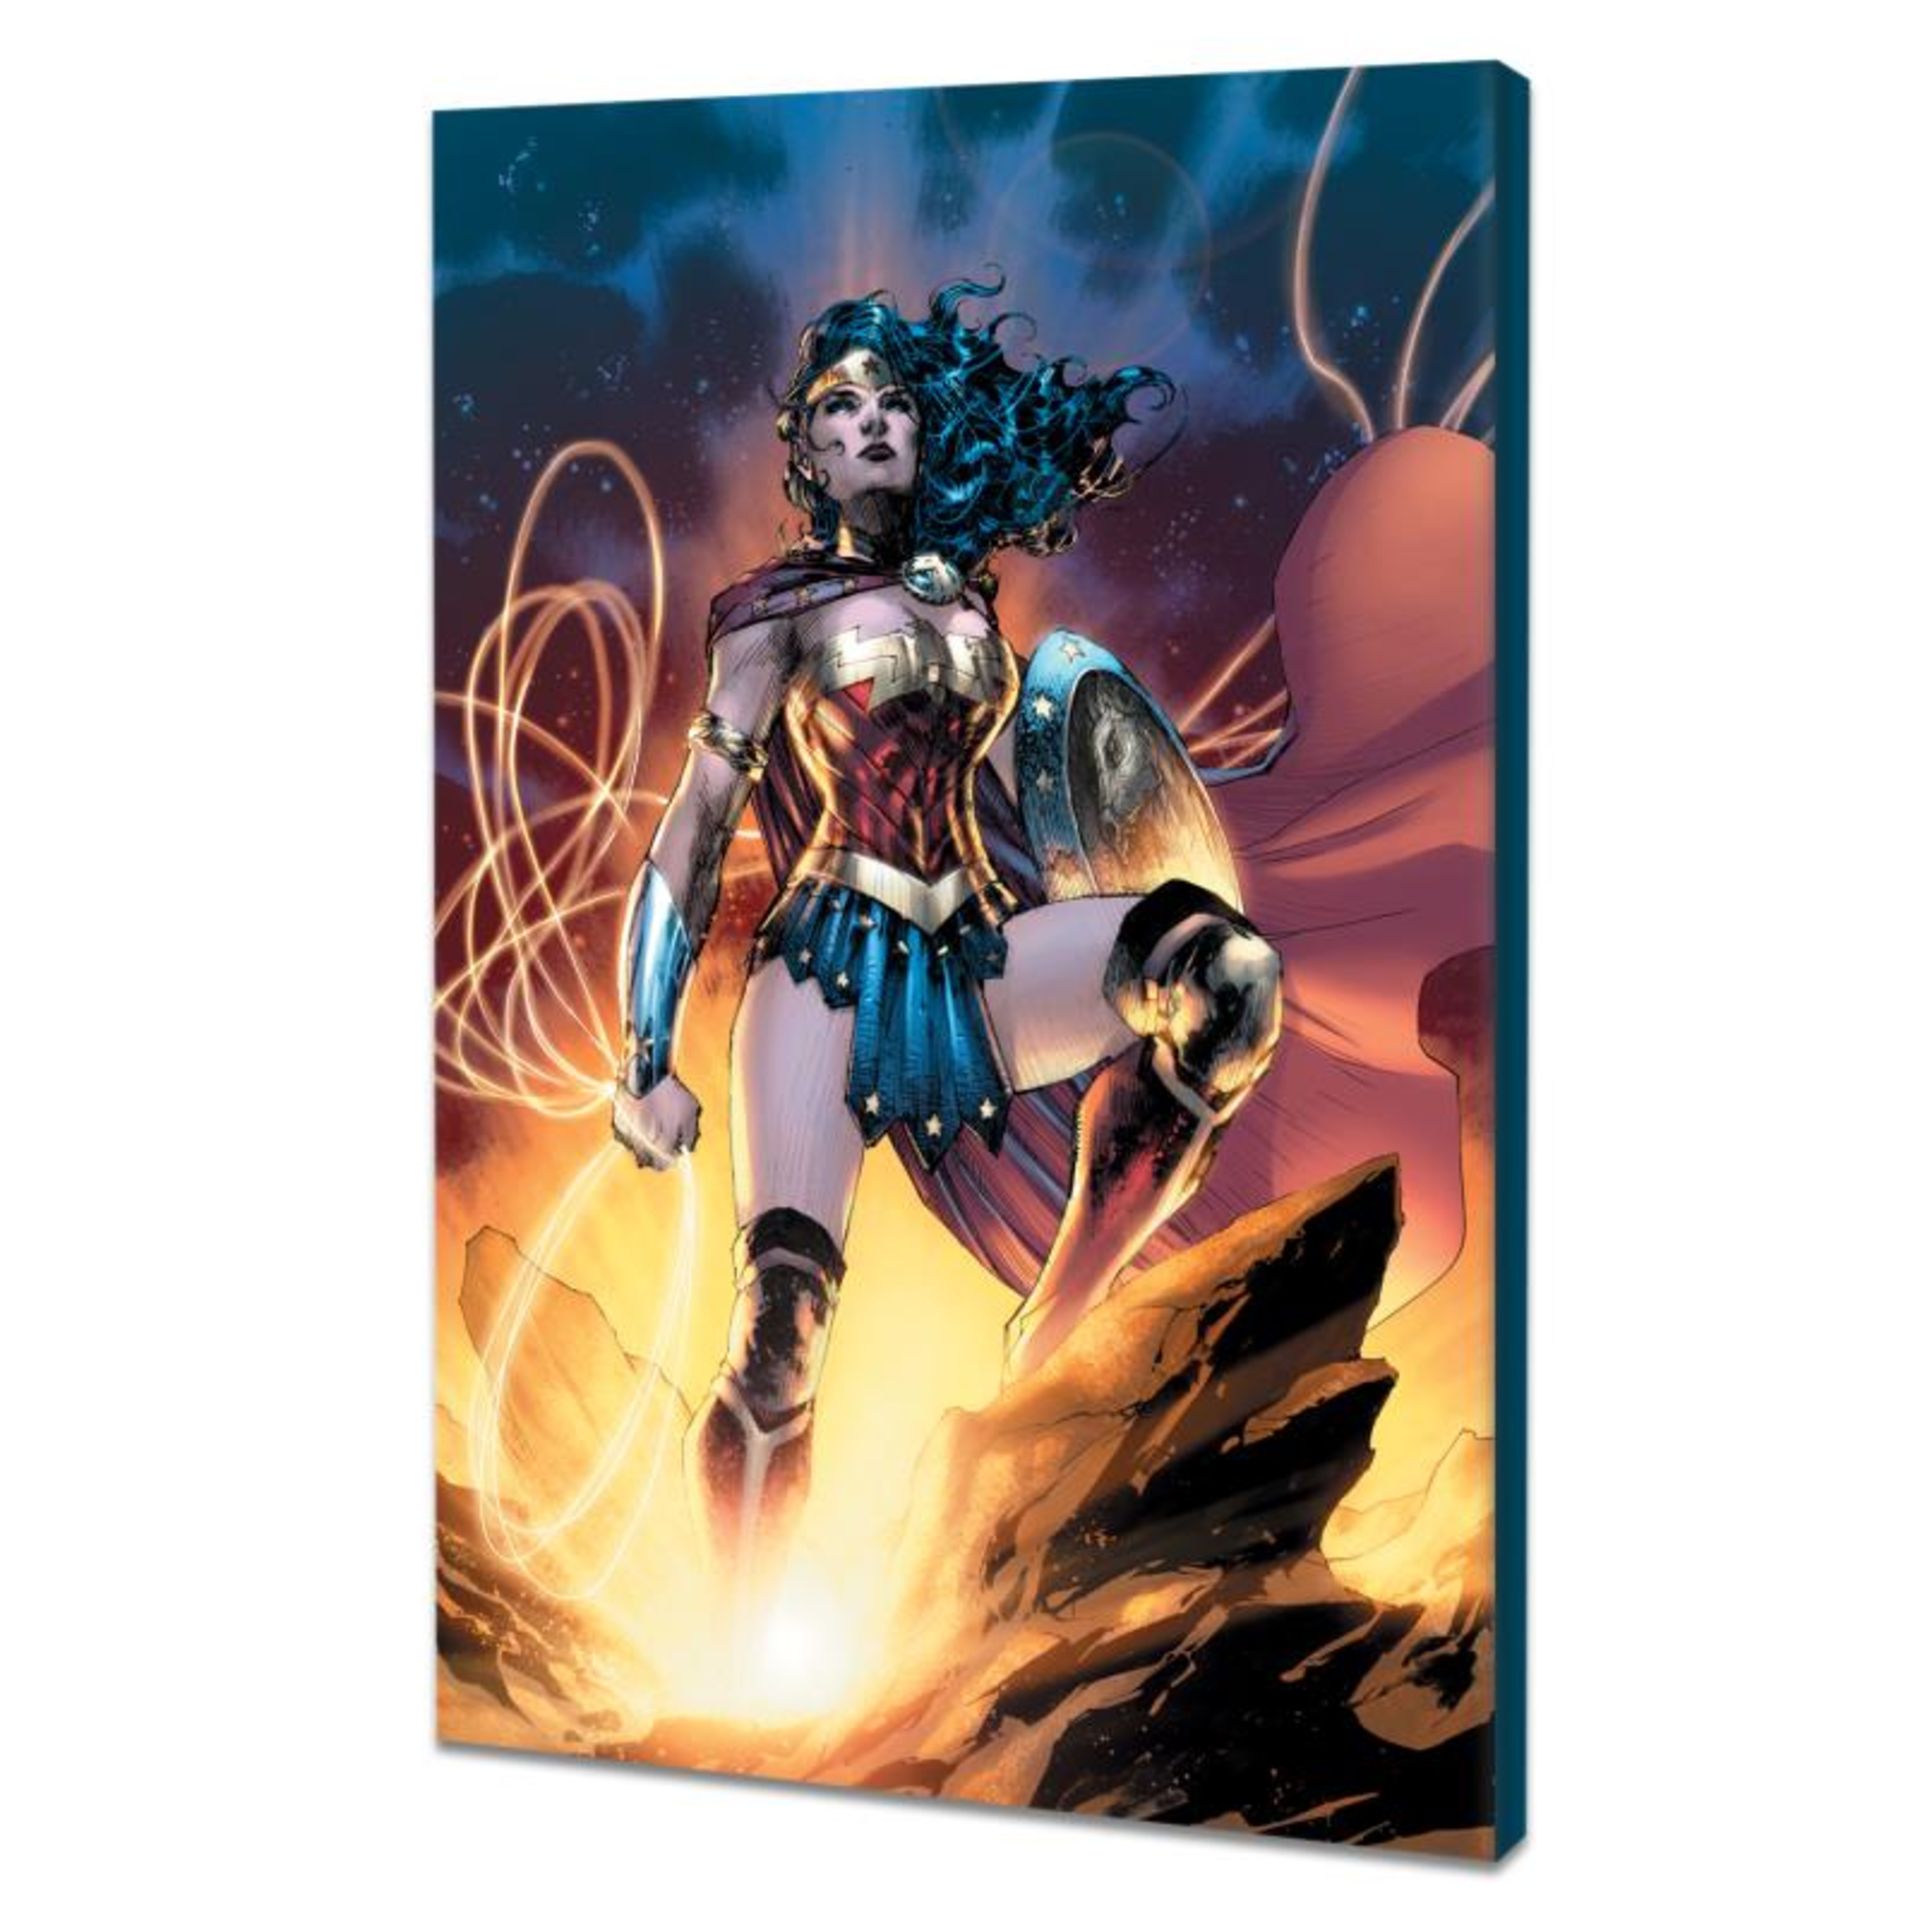 Wonder Woman 75th Anniversary Special #1 by DC Comics - Image 3 of 3